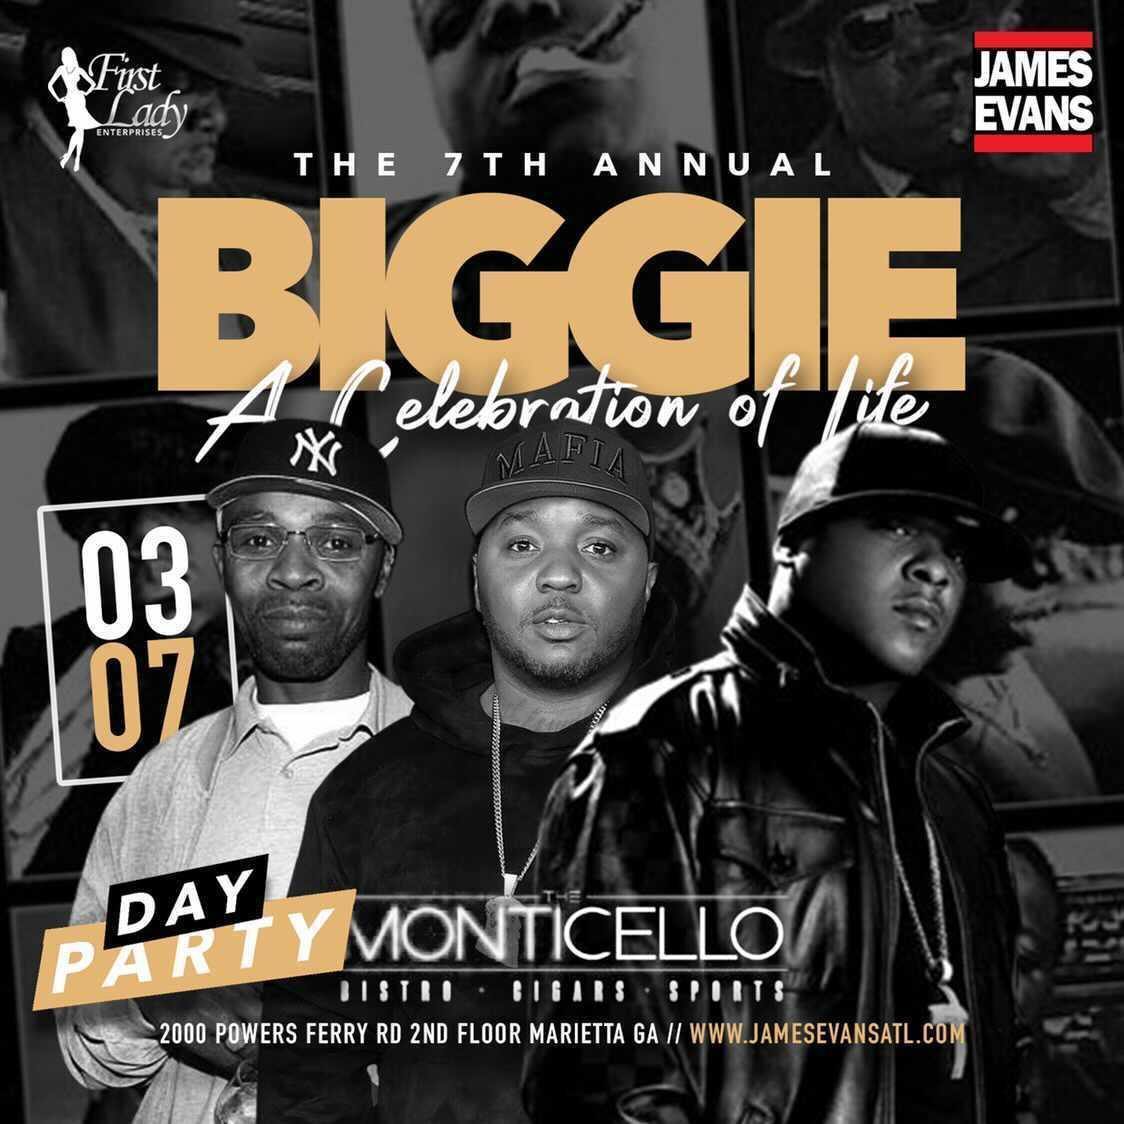 BIGGIE A CELEBRATION OF LIFE WITH JADAKISS & LIL CEASE LIVE @ MONTICELLO